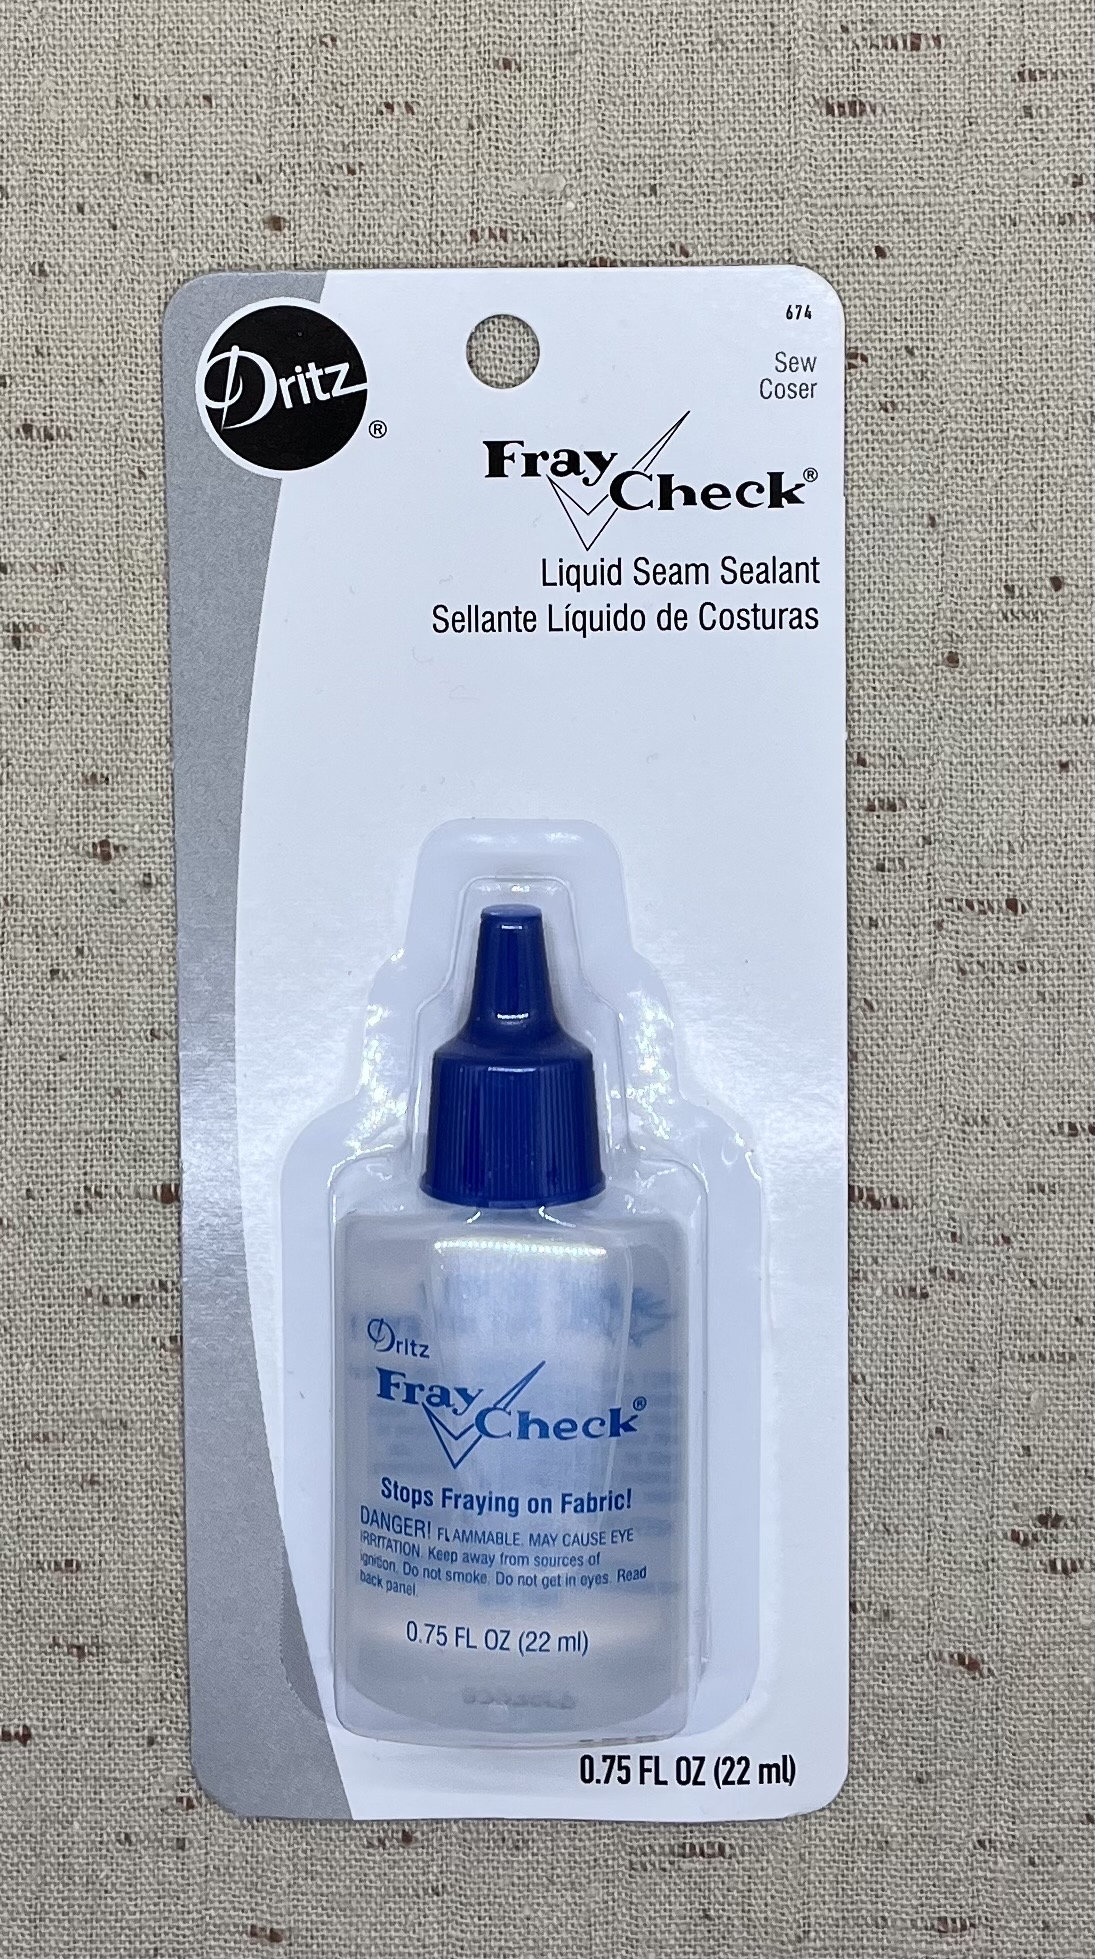 Fray Check, Dritz : Sewing Parts Online